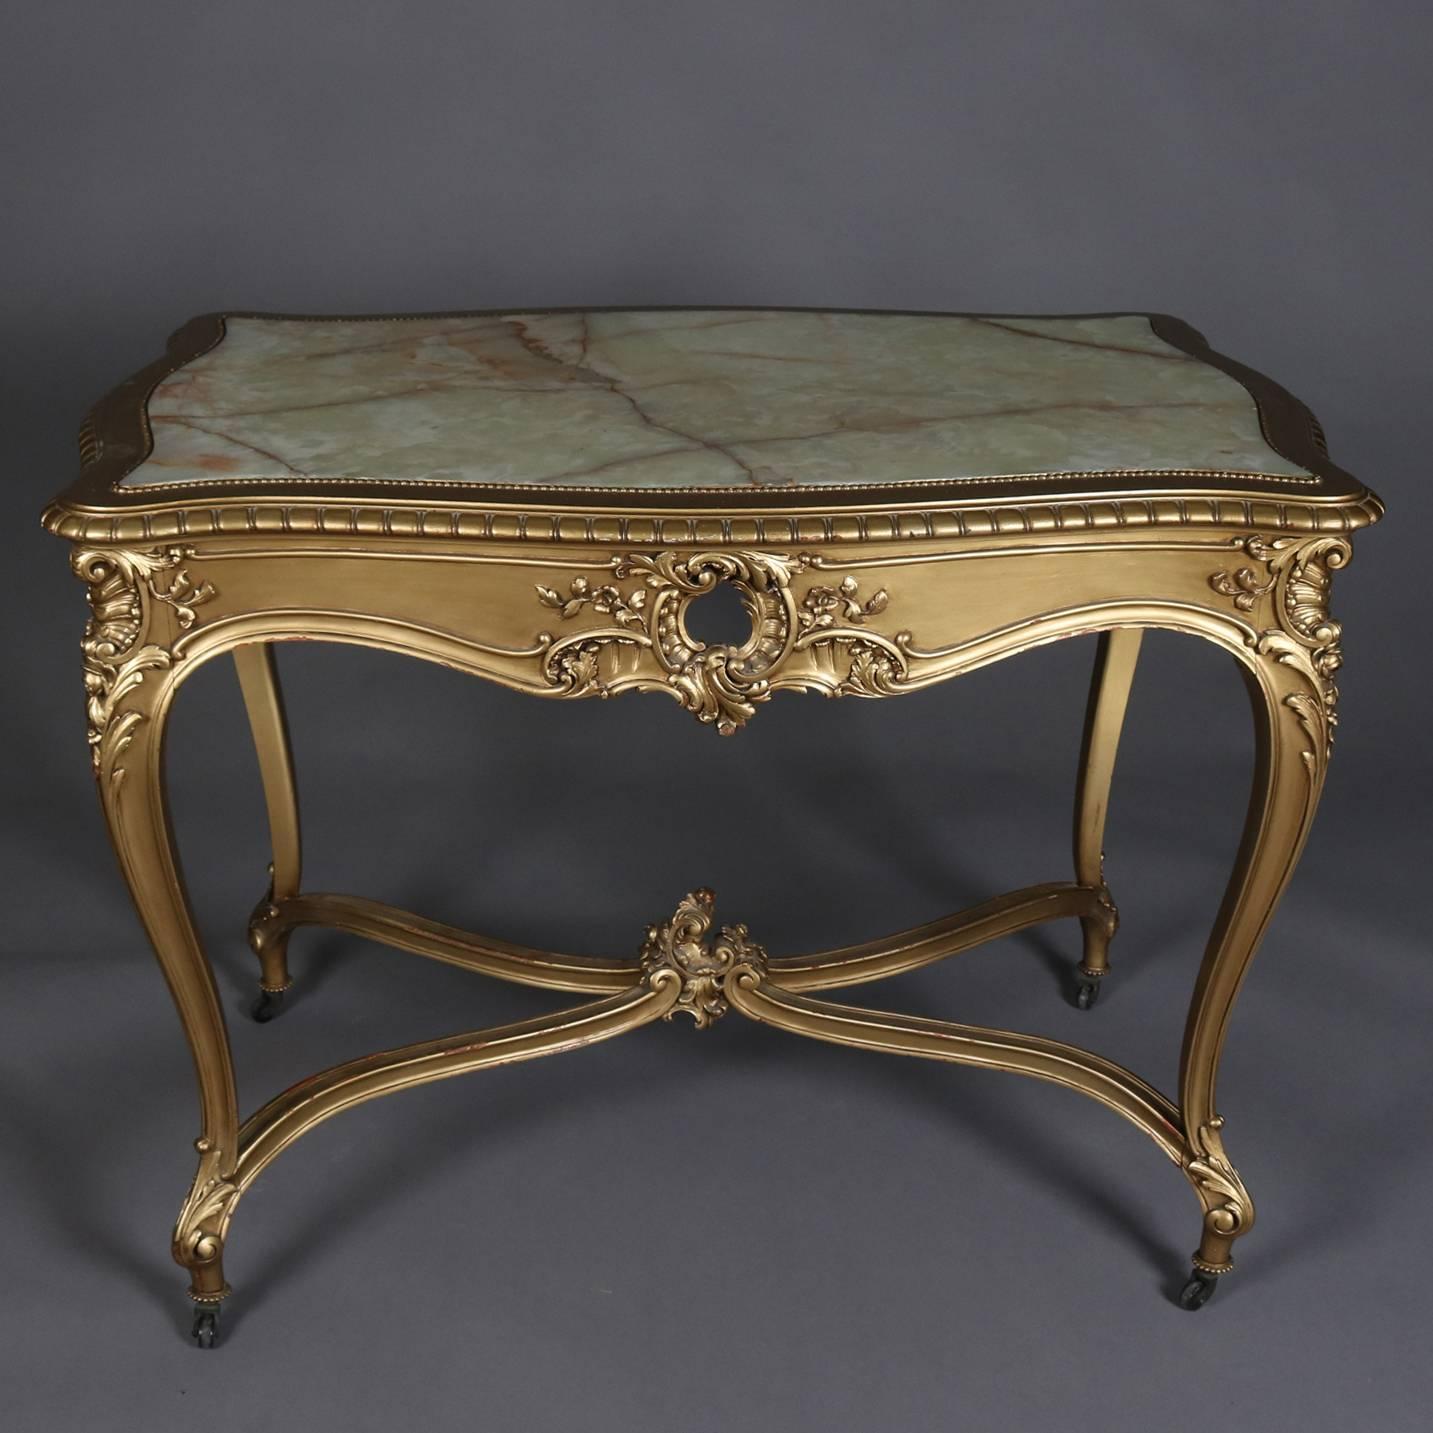 Antique French Louis XIV centre table features gold giltwood floral and foliate frame with pierced apron seated on cabriole legs and having inset onyx top, 19th century

Measures - 32